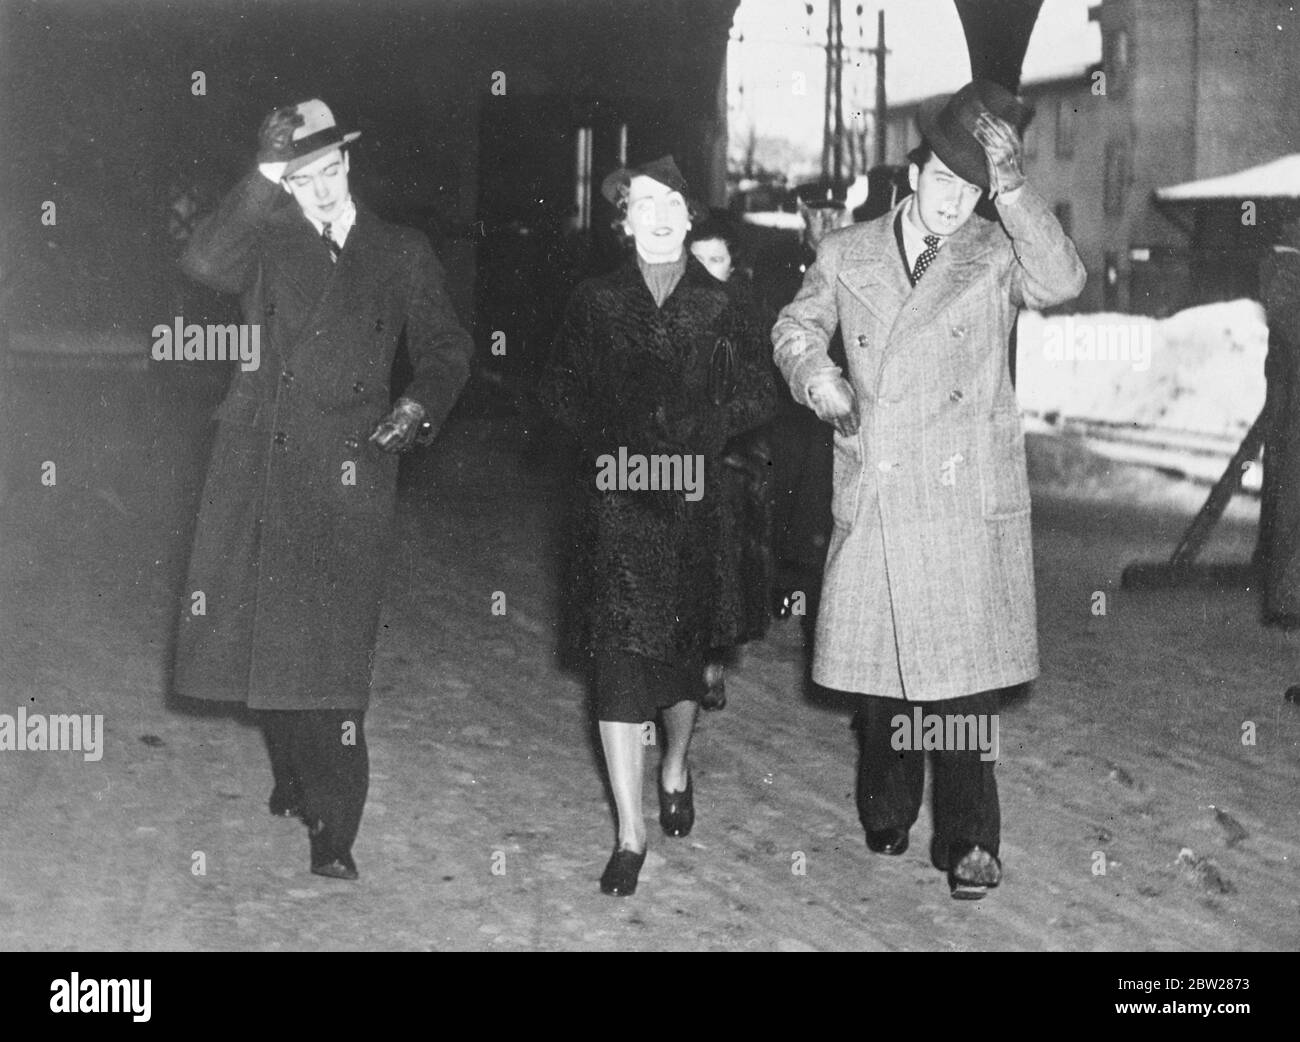 Crown Princess Ingrid welcomed by her brothers, visiting her father in Stockholm. Crown Princess Ingrid of Denmark, wife of Crown Prince Frederik, has arrived in Stockholm to visit her father, Crown Prince Gustaf Adolf of Sweden. Photo shows, Crown Princess Ingrid with her two brothers, who greeted her on arrival in Stockholm. Prince Carl Johan is on left and Prince Bertil on right. 8 January 1938 Stock Photo